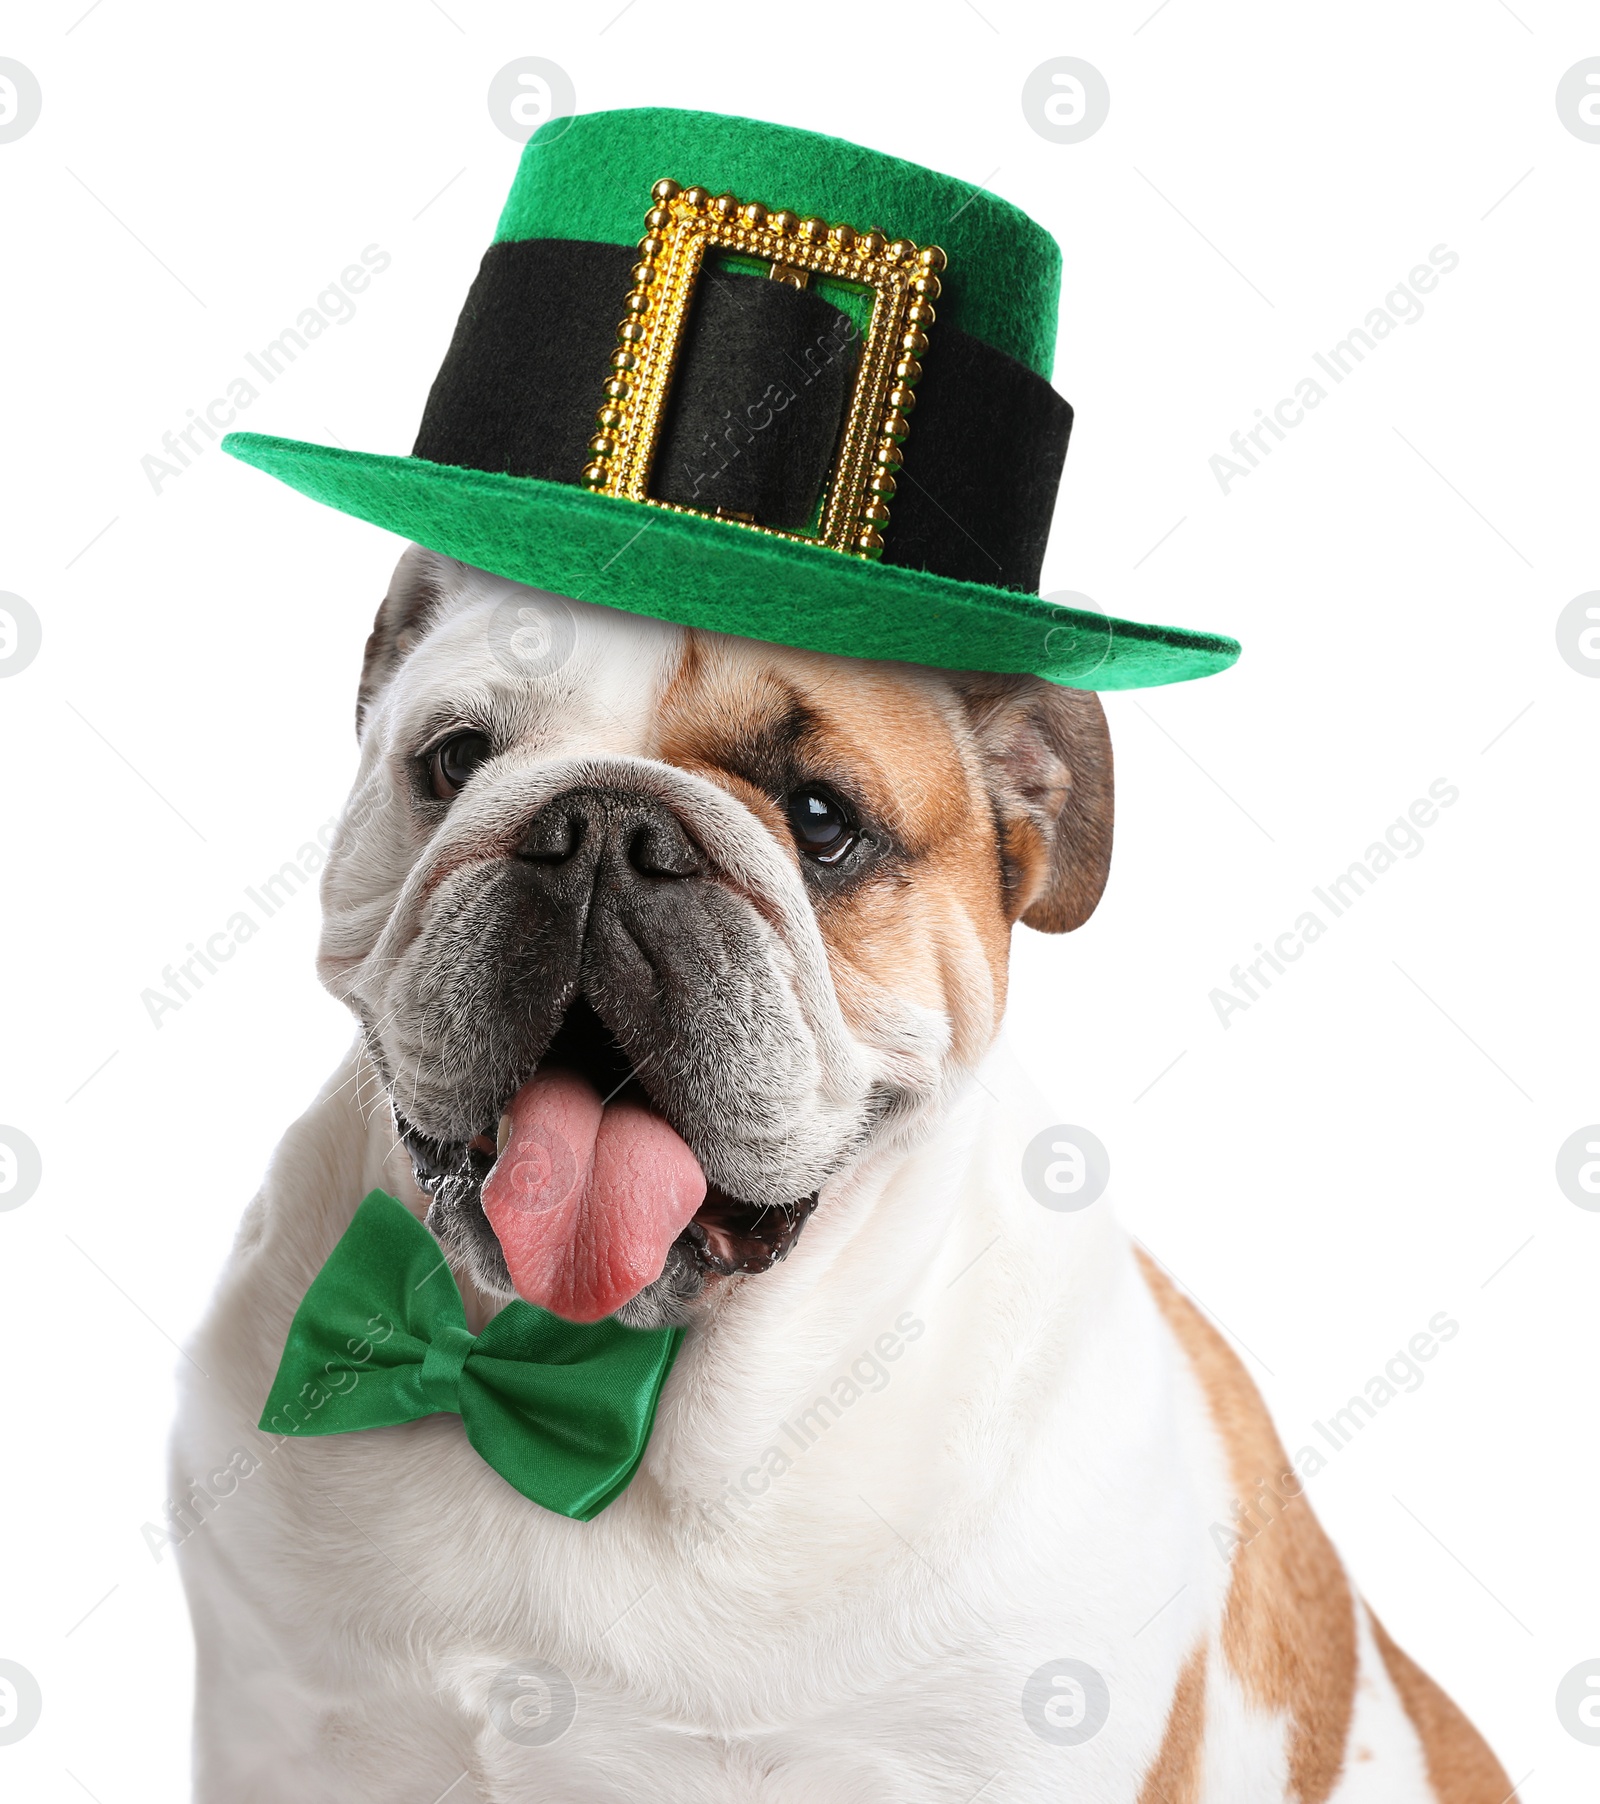 Image of Cute  English bulldog with leprechaun hat and bow tie on white background. St. Patrick's Day